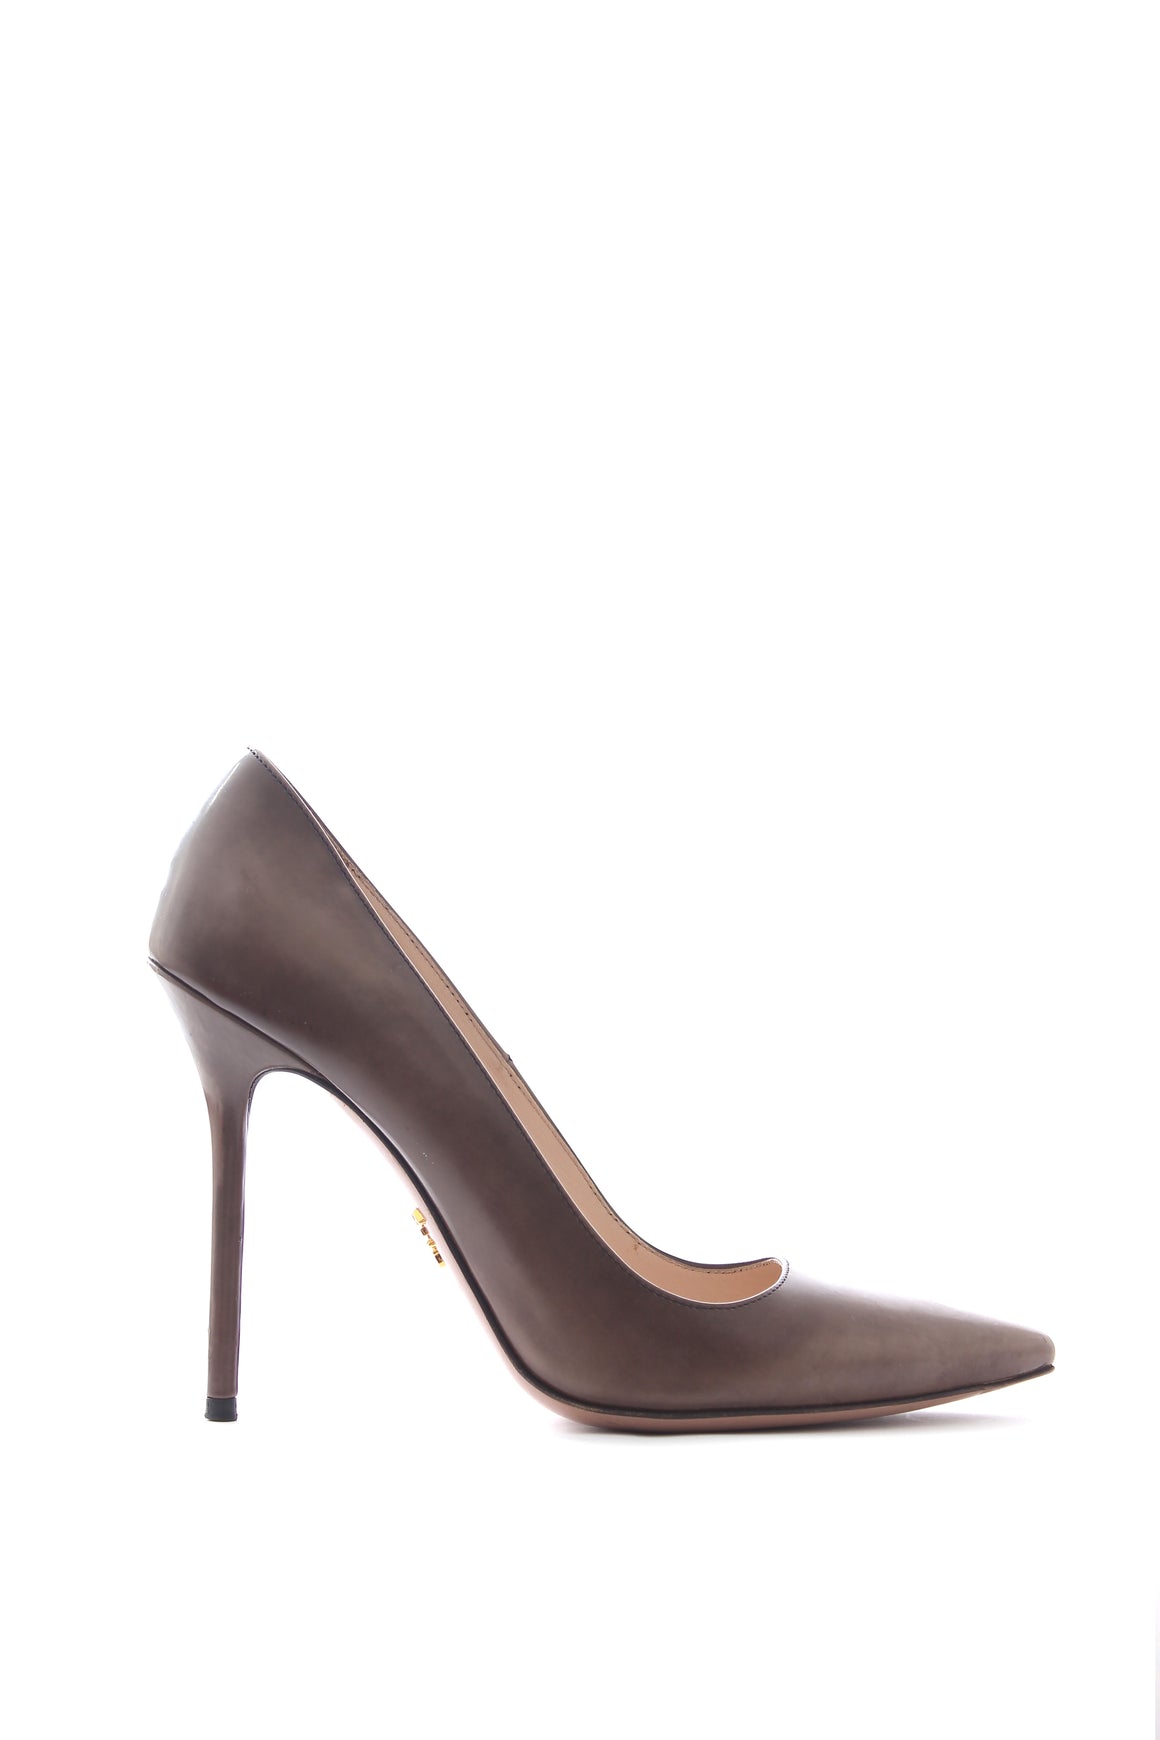 Prada Pointed Toe Brushed Leather Pumps